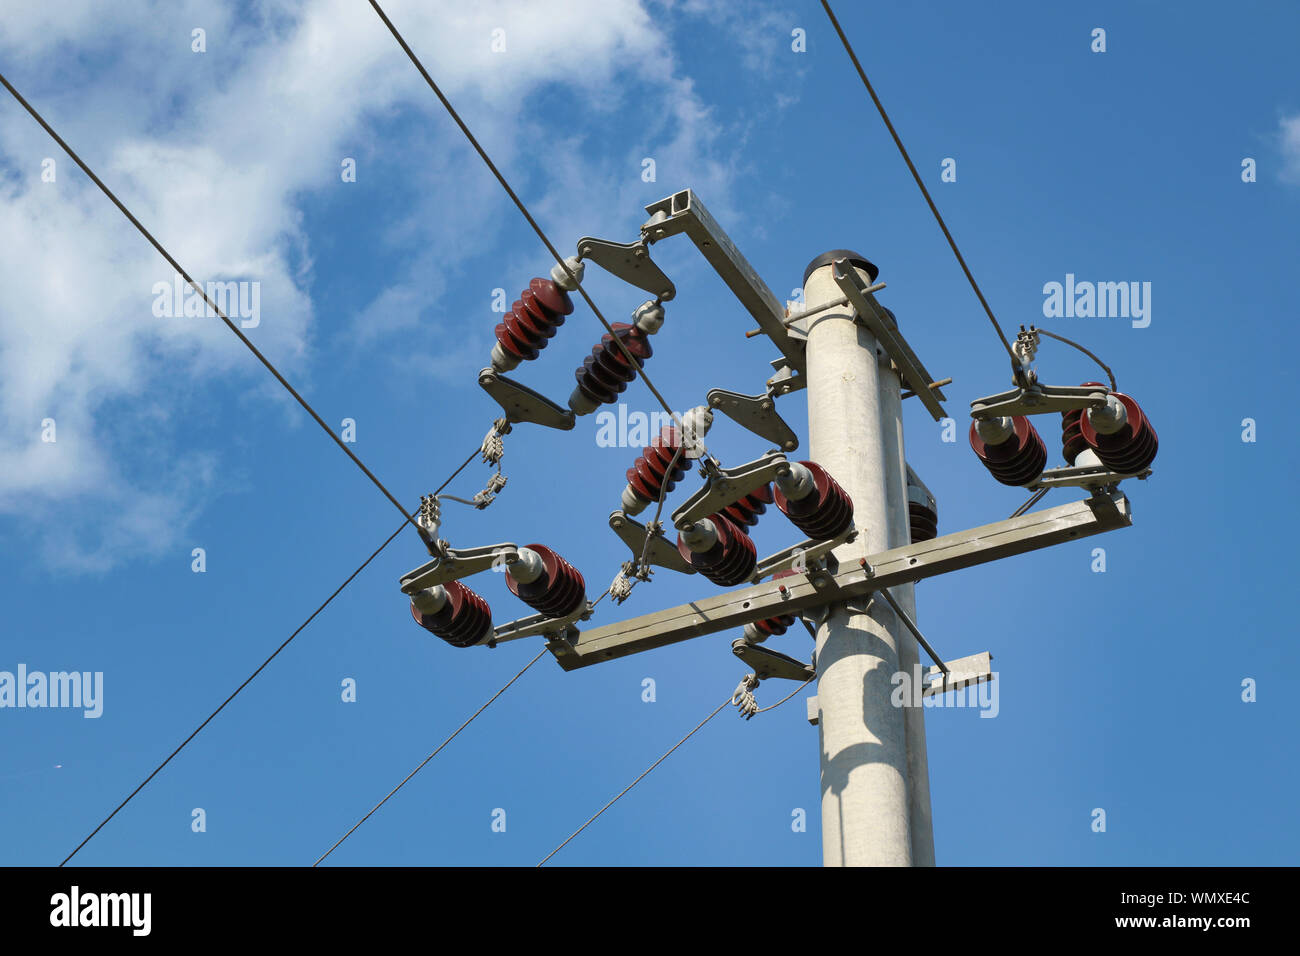 Concrete pole with high voltage three phase power line Stock Photo